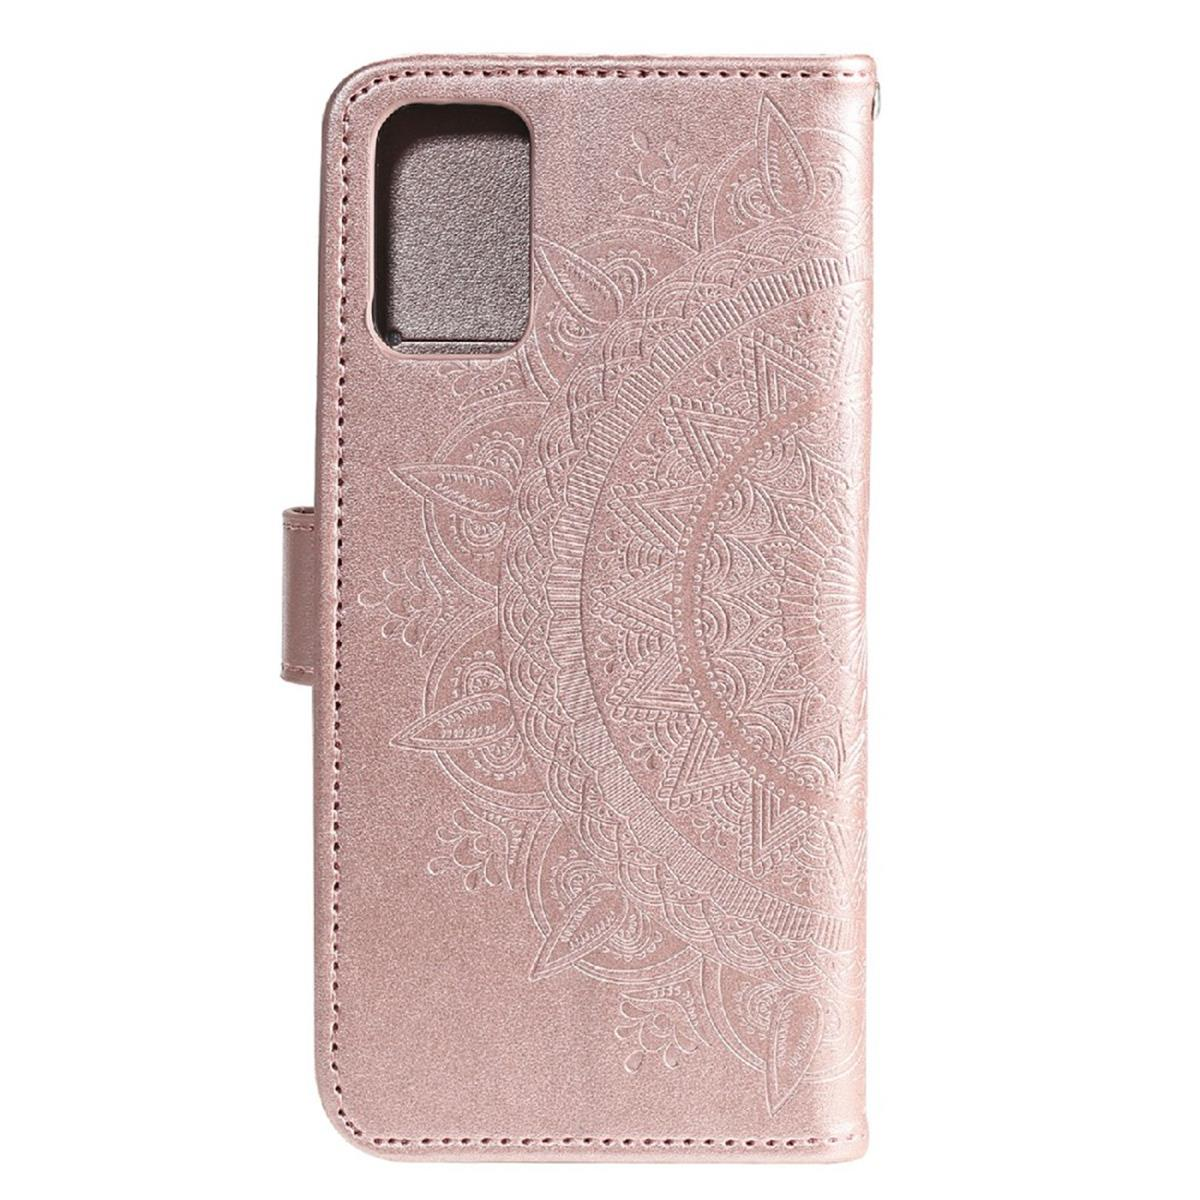 COVERKINGZ Klapphülle mit Mandala Galaxy Bookcover, Muster, Rosegold A03s, Samsung